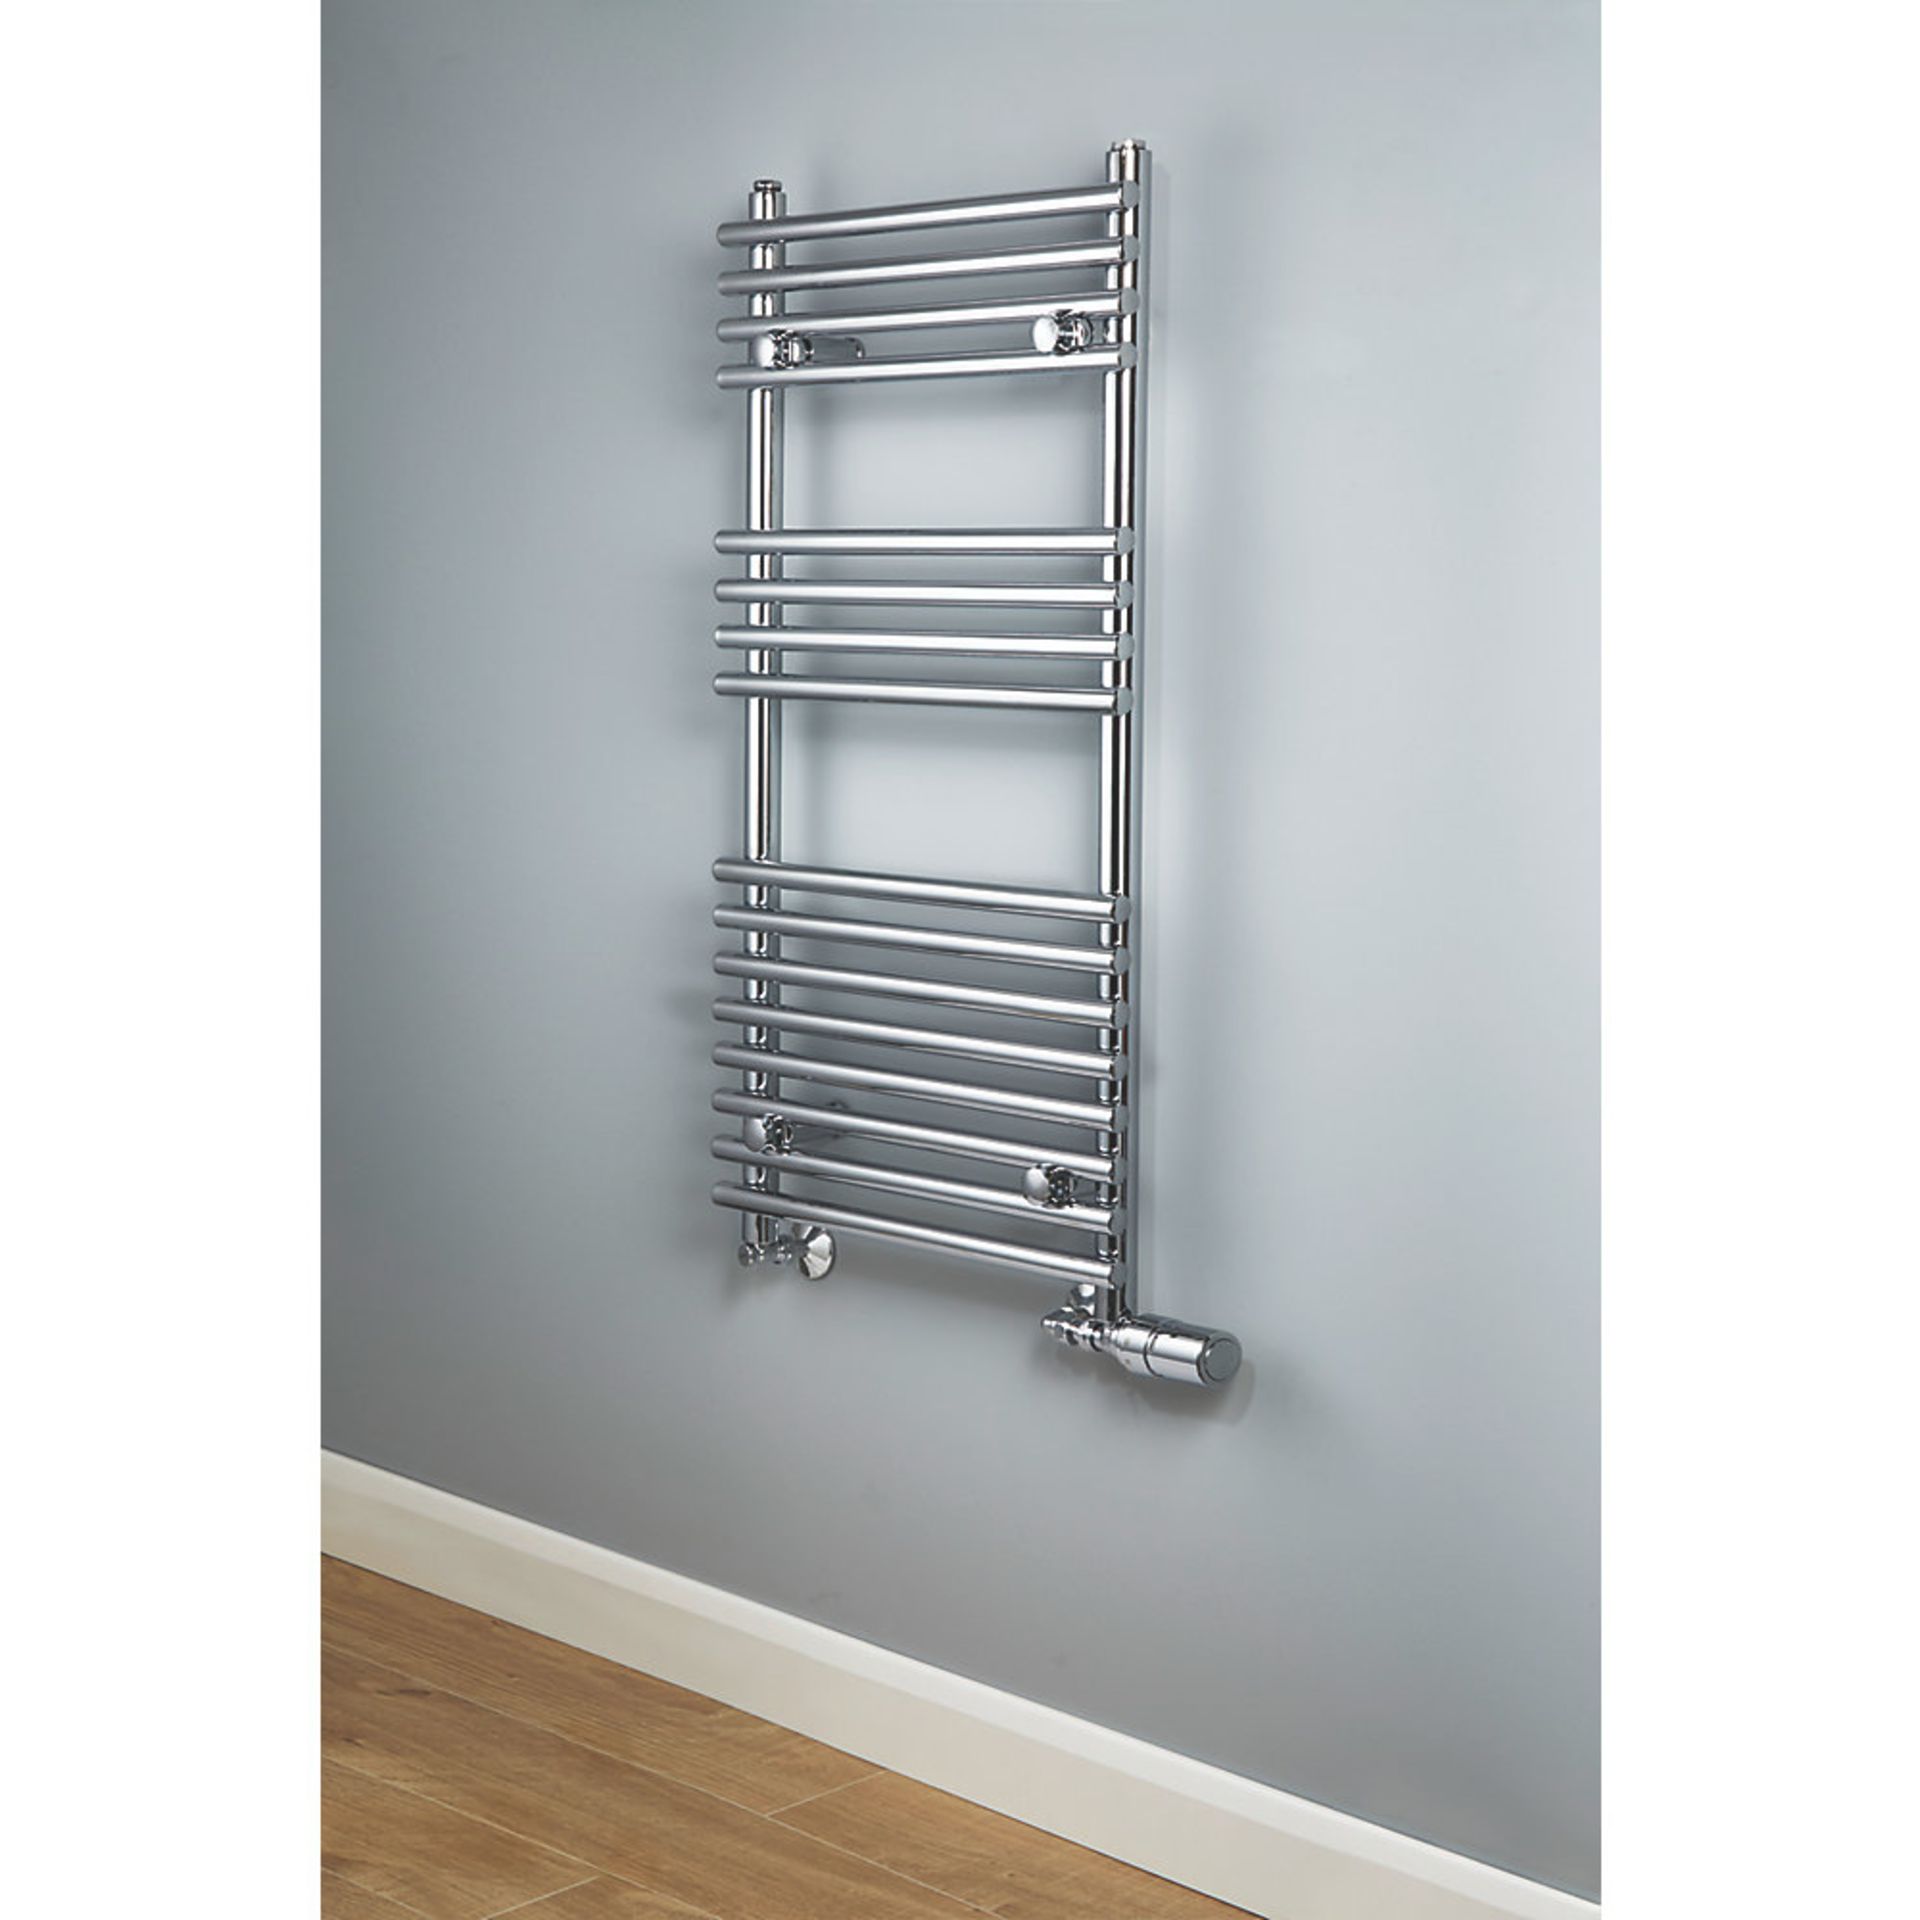 (ED4) 1100x500mm Chrome Towel Radiator. Mild steel construction with a chrome-plated finish. Flat